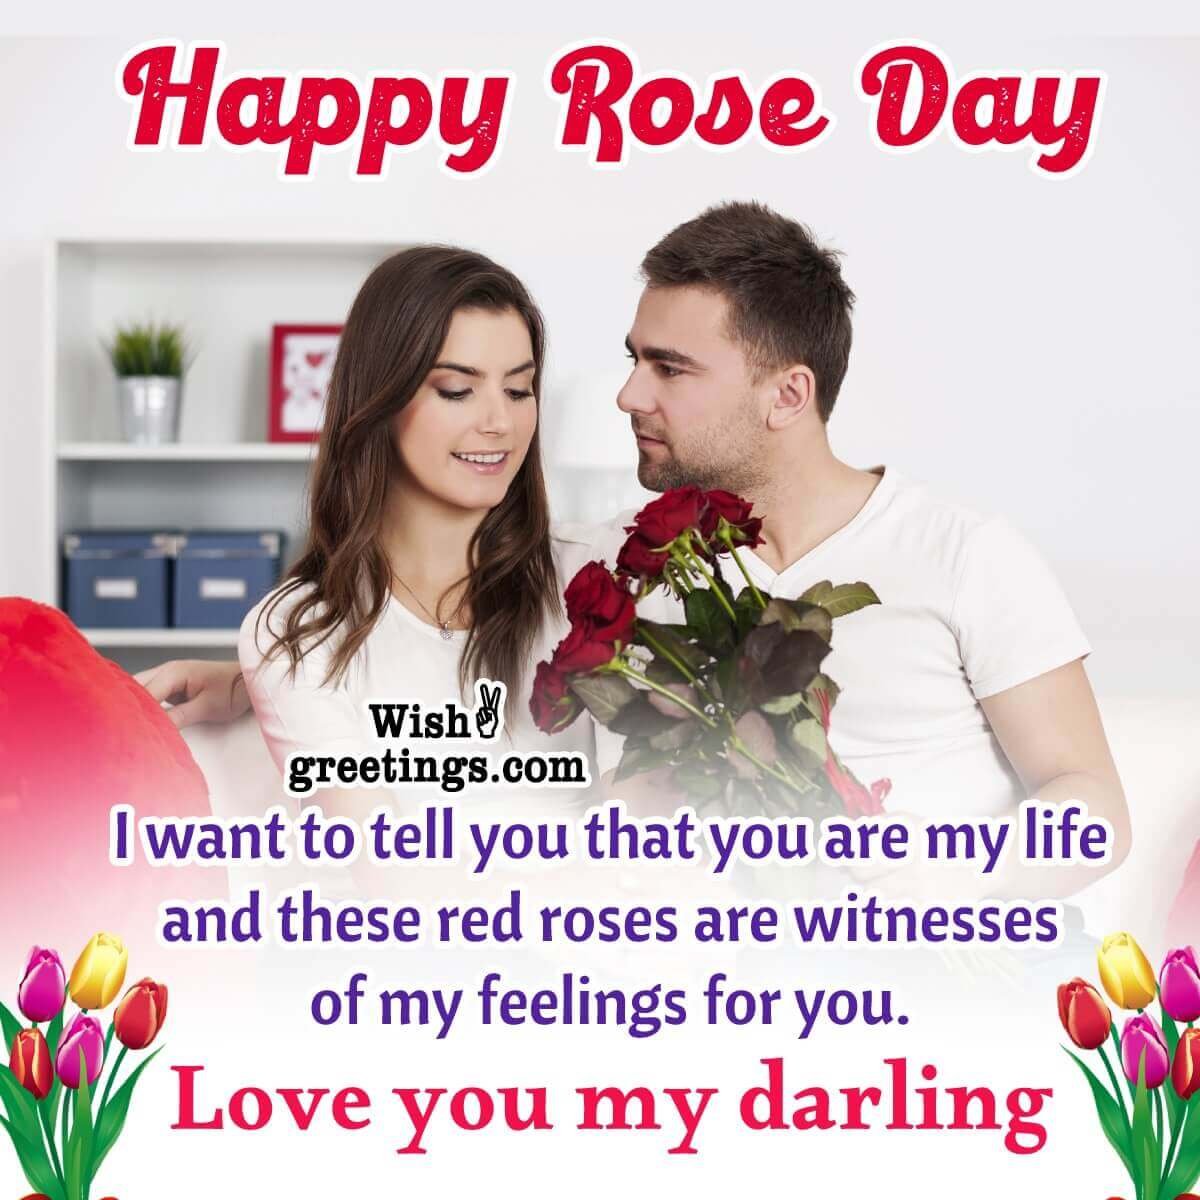 Happy Rose Day Wish Image For Darling